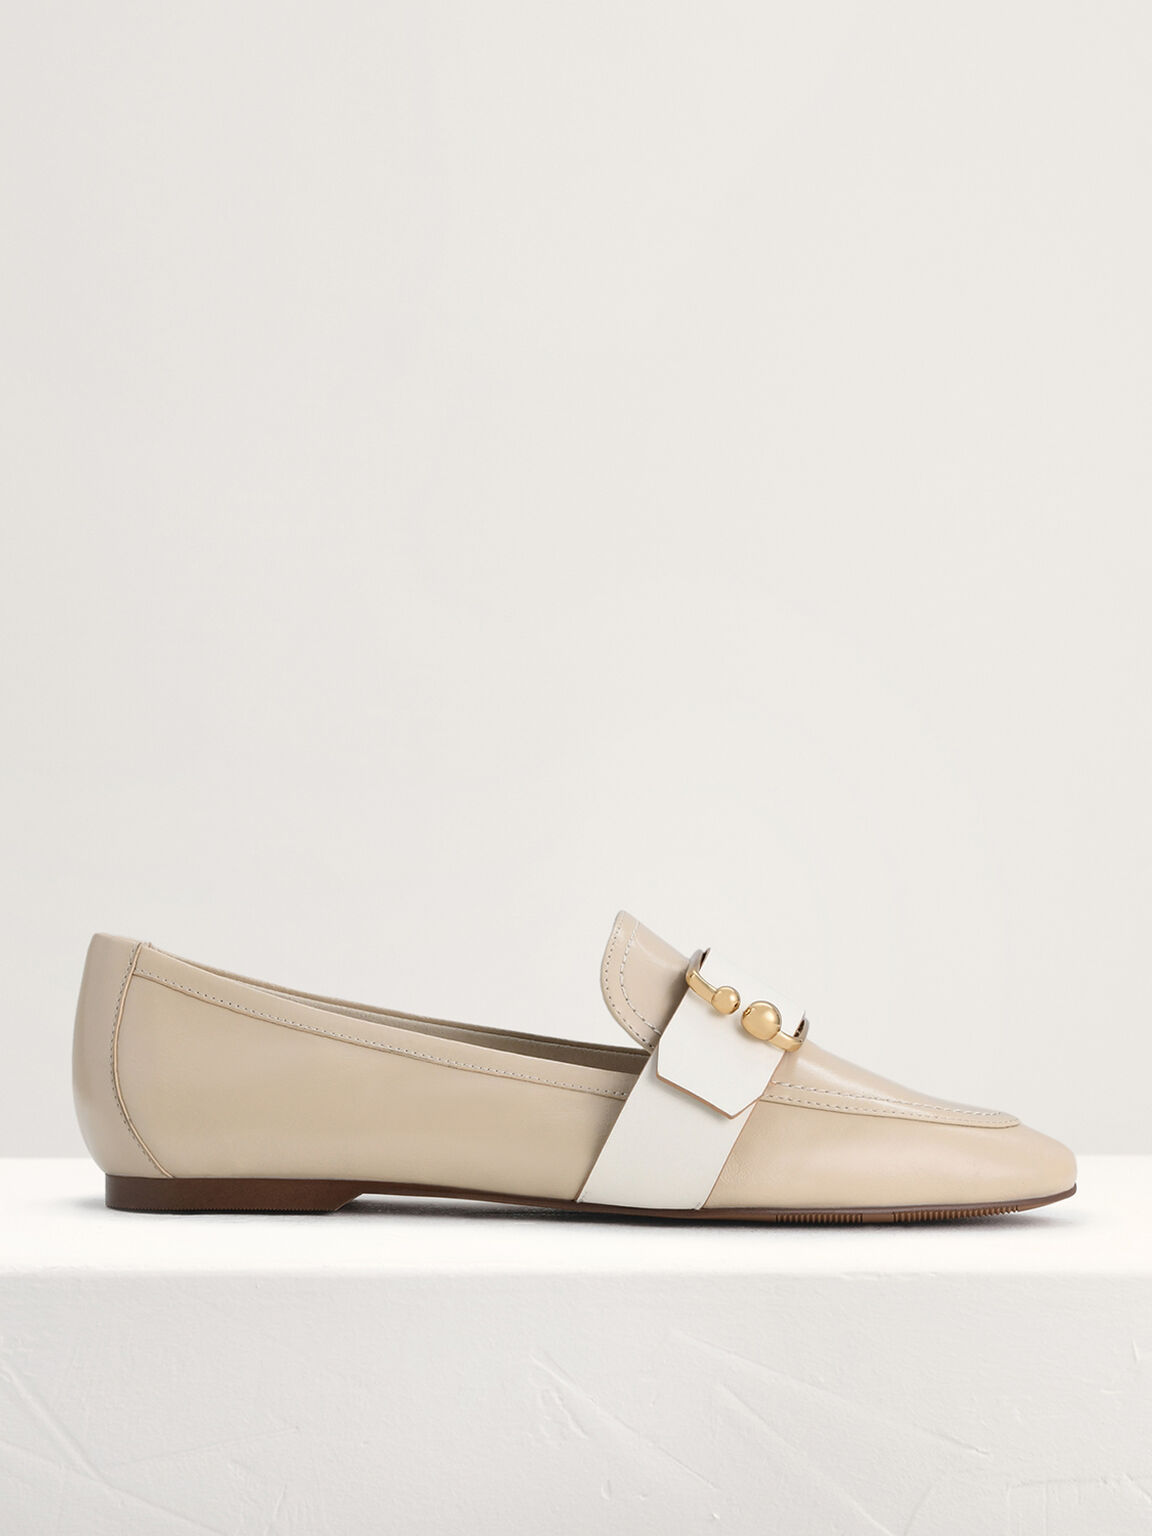 Buckle Leather Loafers, Beige, hi-res